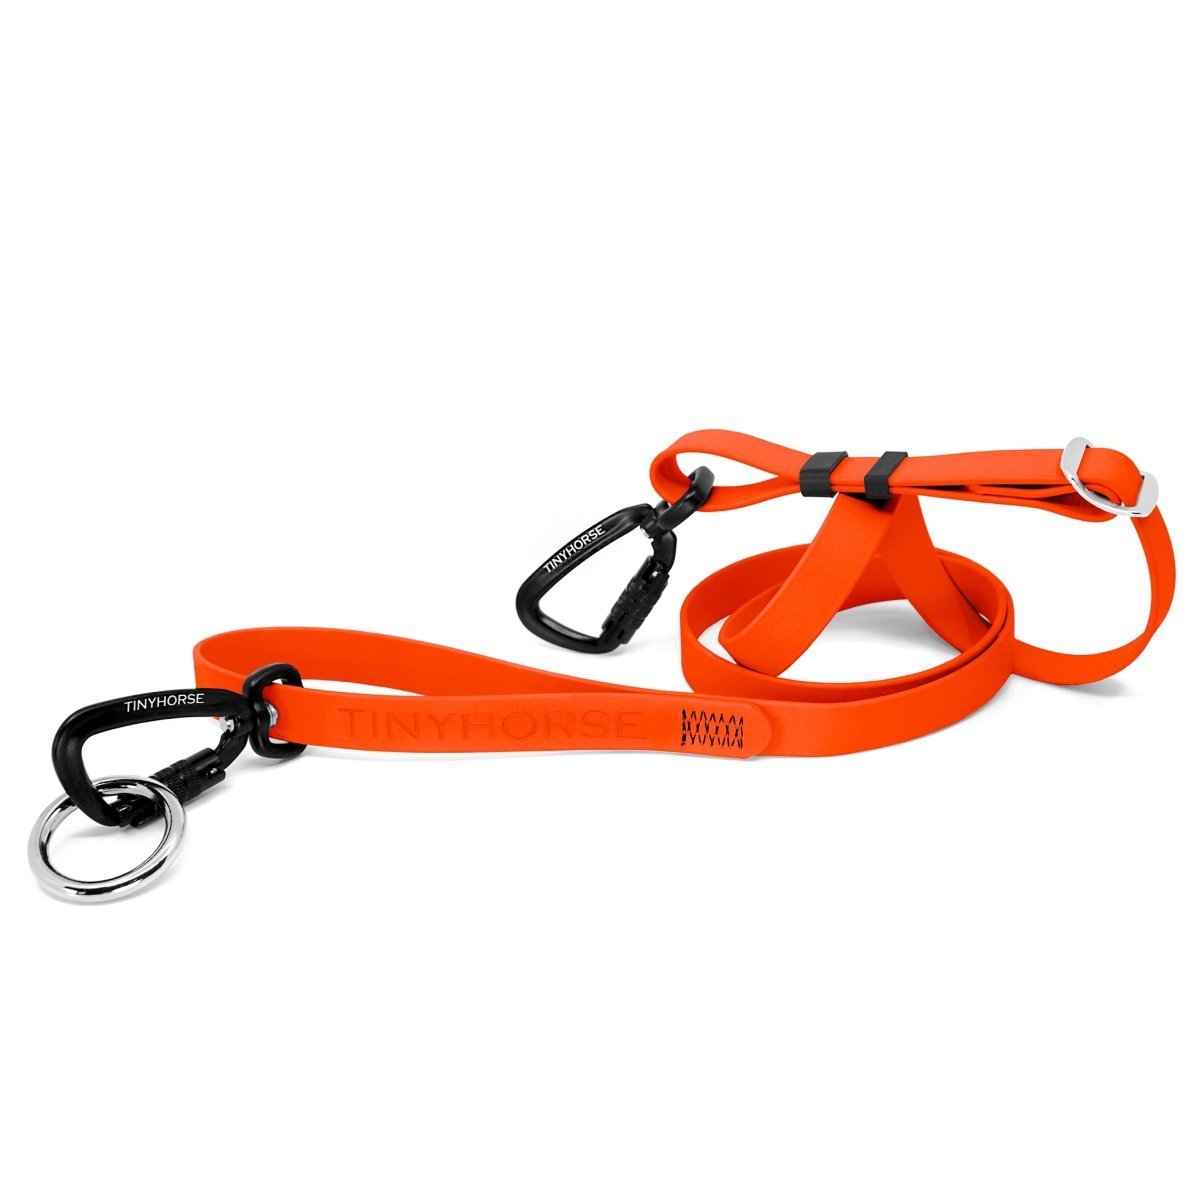 Lead-All Pro Extra - Neon Orange-coloured adjustable dog leash made of biothane. There are black auto-locking carabiner clips on either end. TinyHorse is stamped onto the leash handle